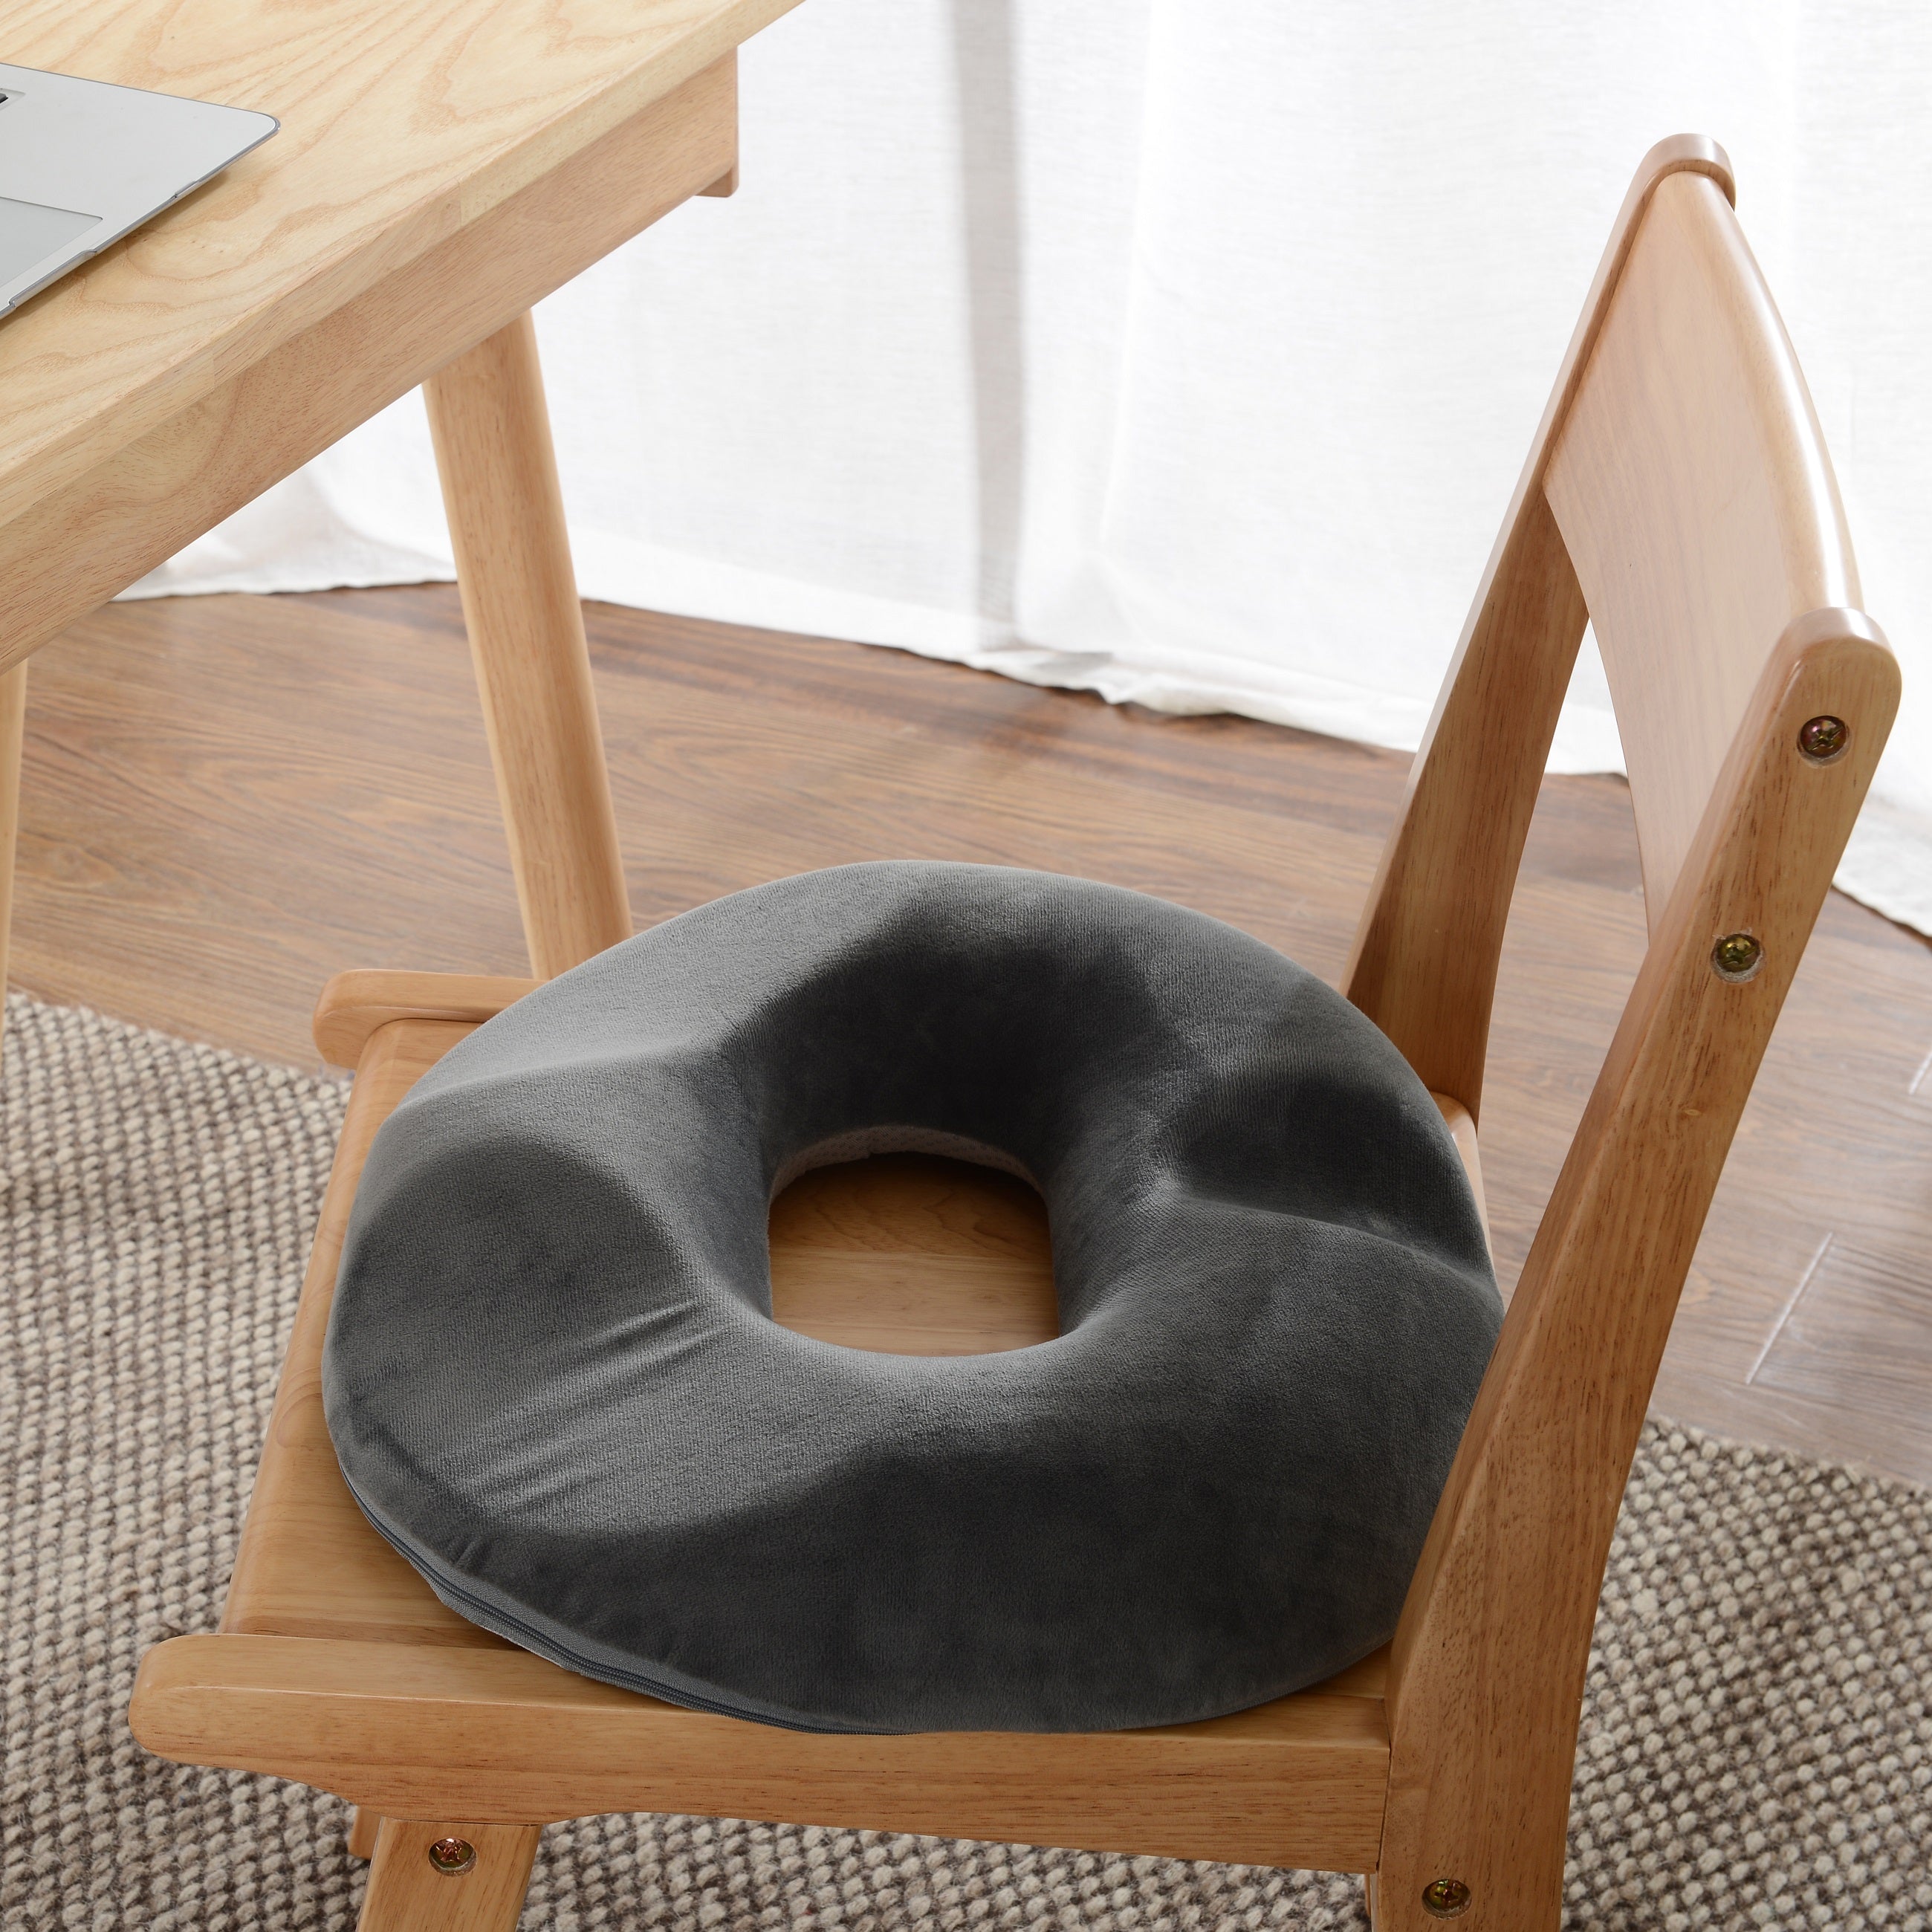 How To Make Donut Seat Cushion for Long Sitting